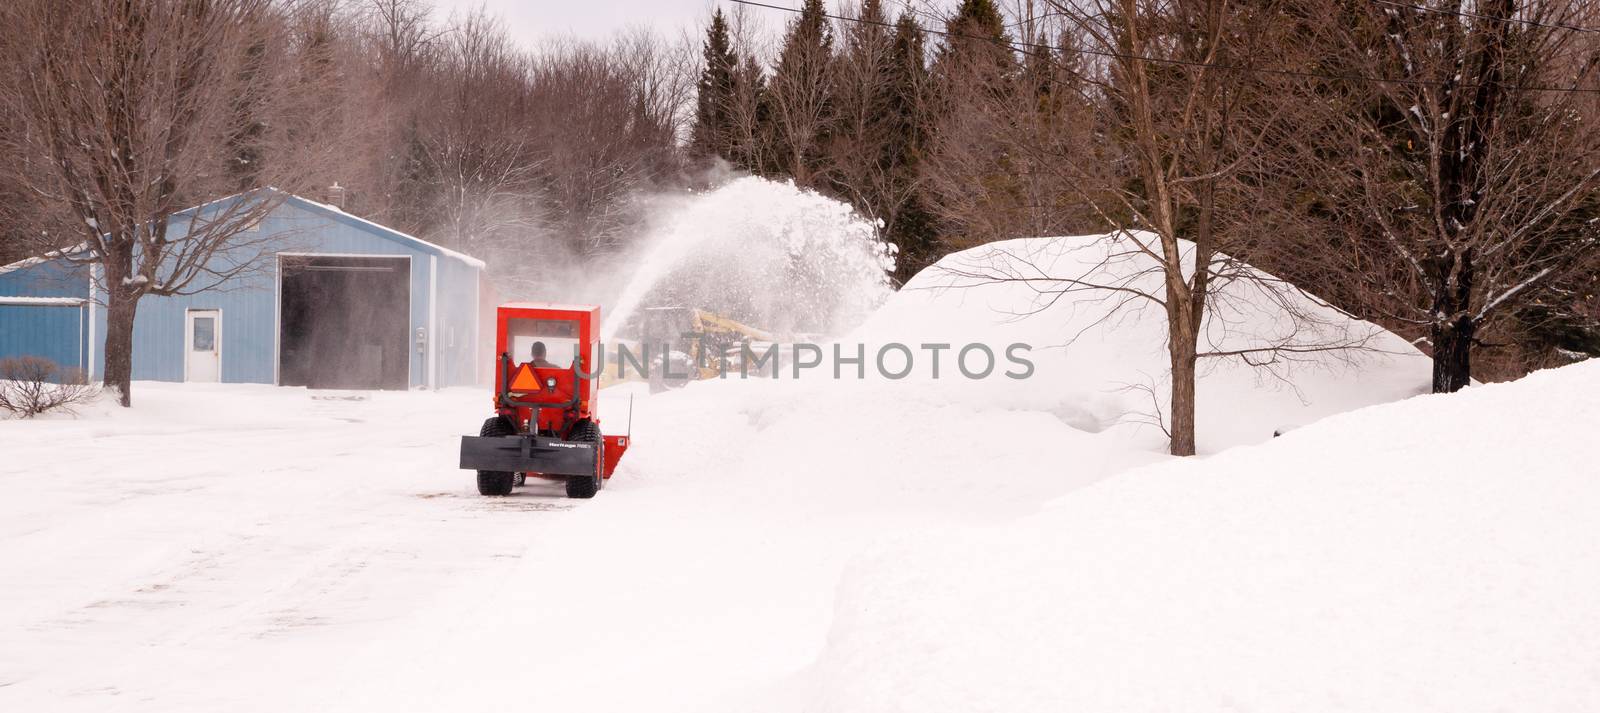 Small snowblowing tractor takes on the driveway after a long night of snowfall